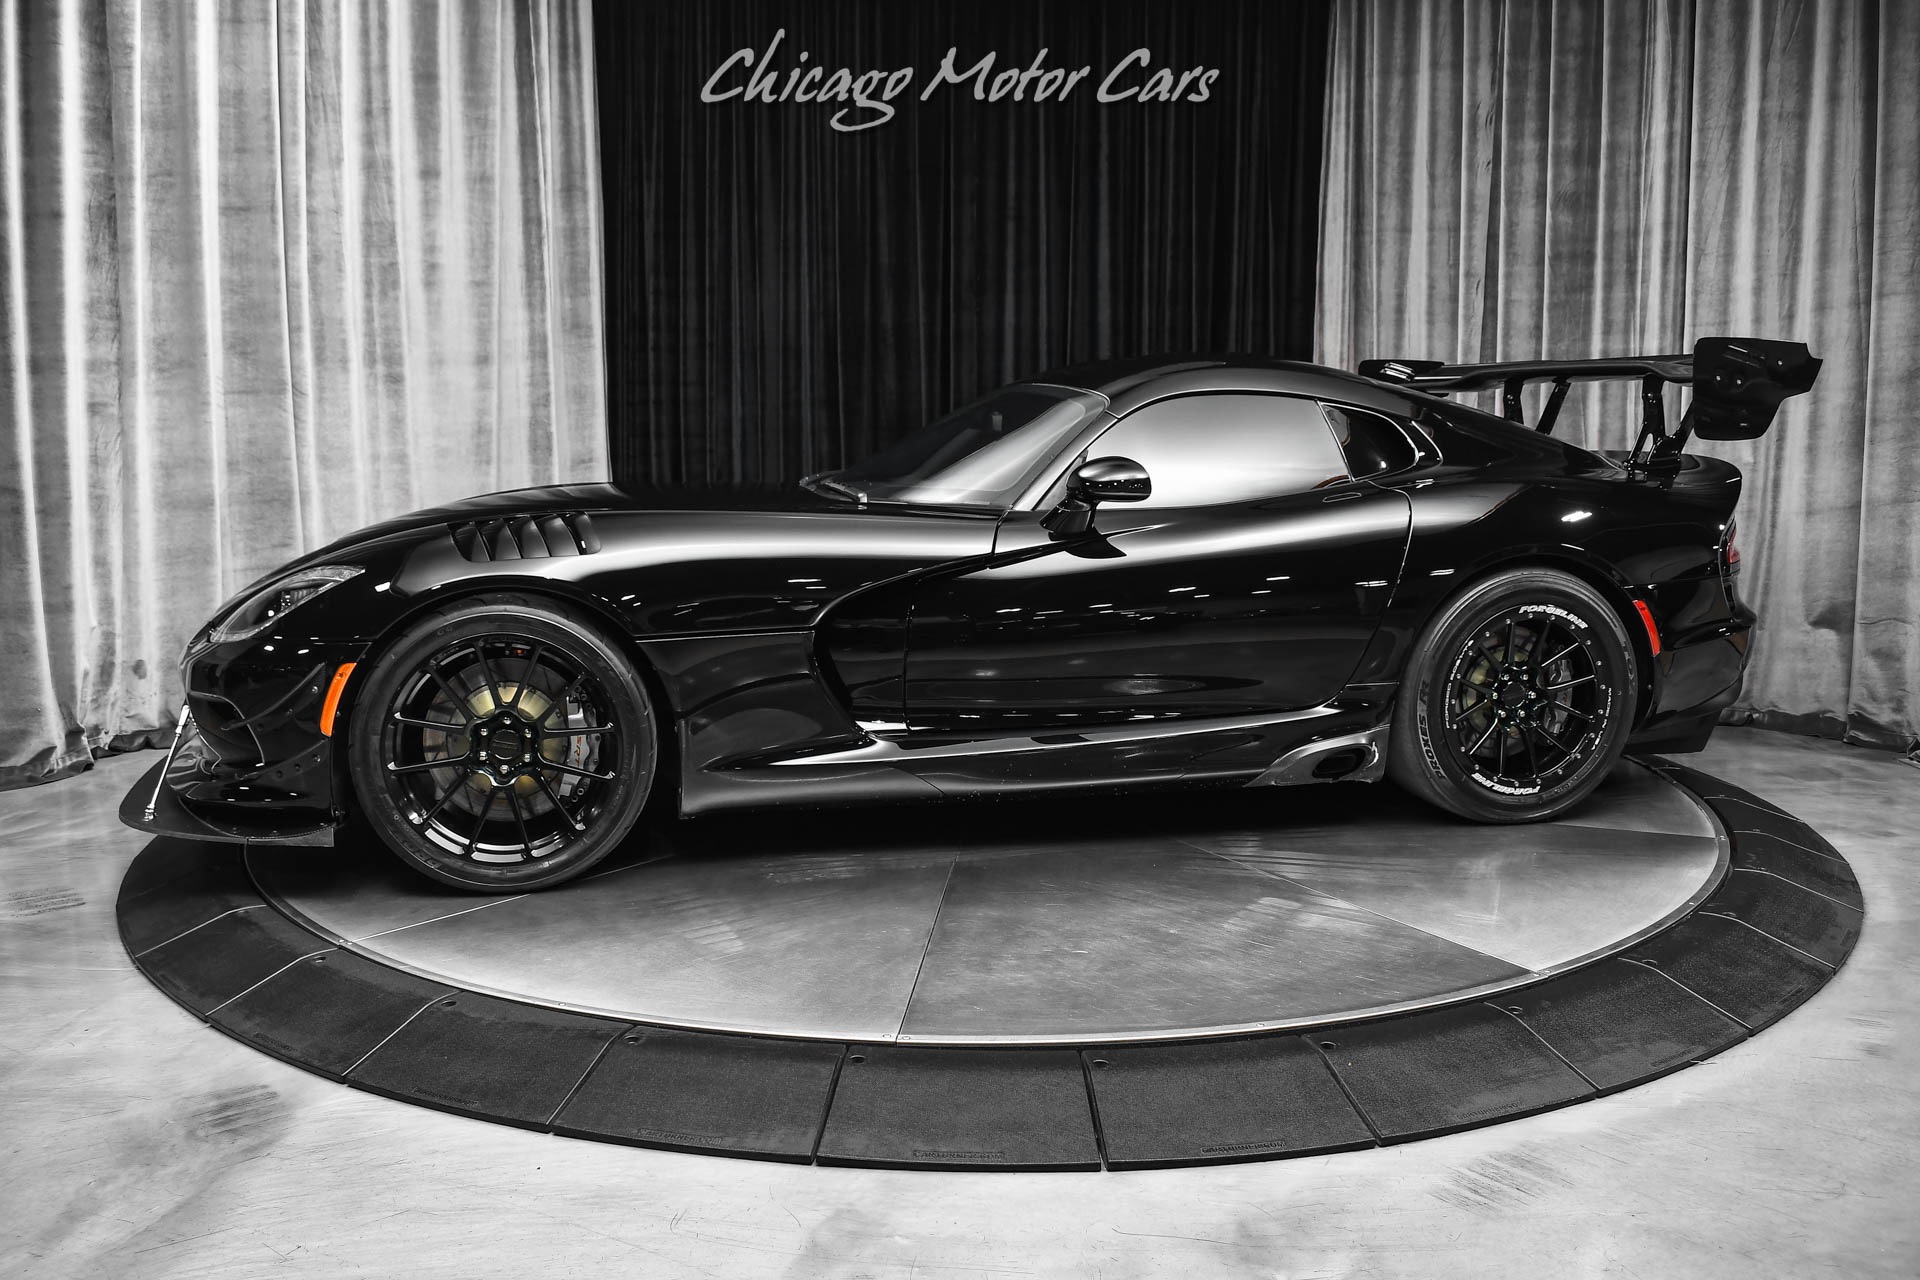 Used-2016-Dodge-Viper-ACR-Extreme-Aero-Coupe-Twin-Turbo-FULLY-Built-Motor-2000-WHP-LOADED